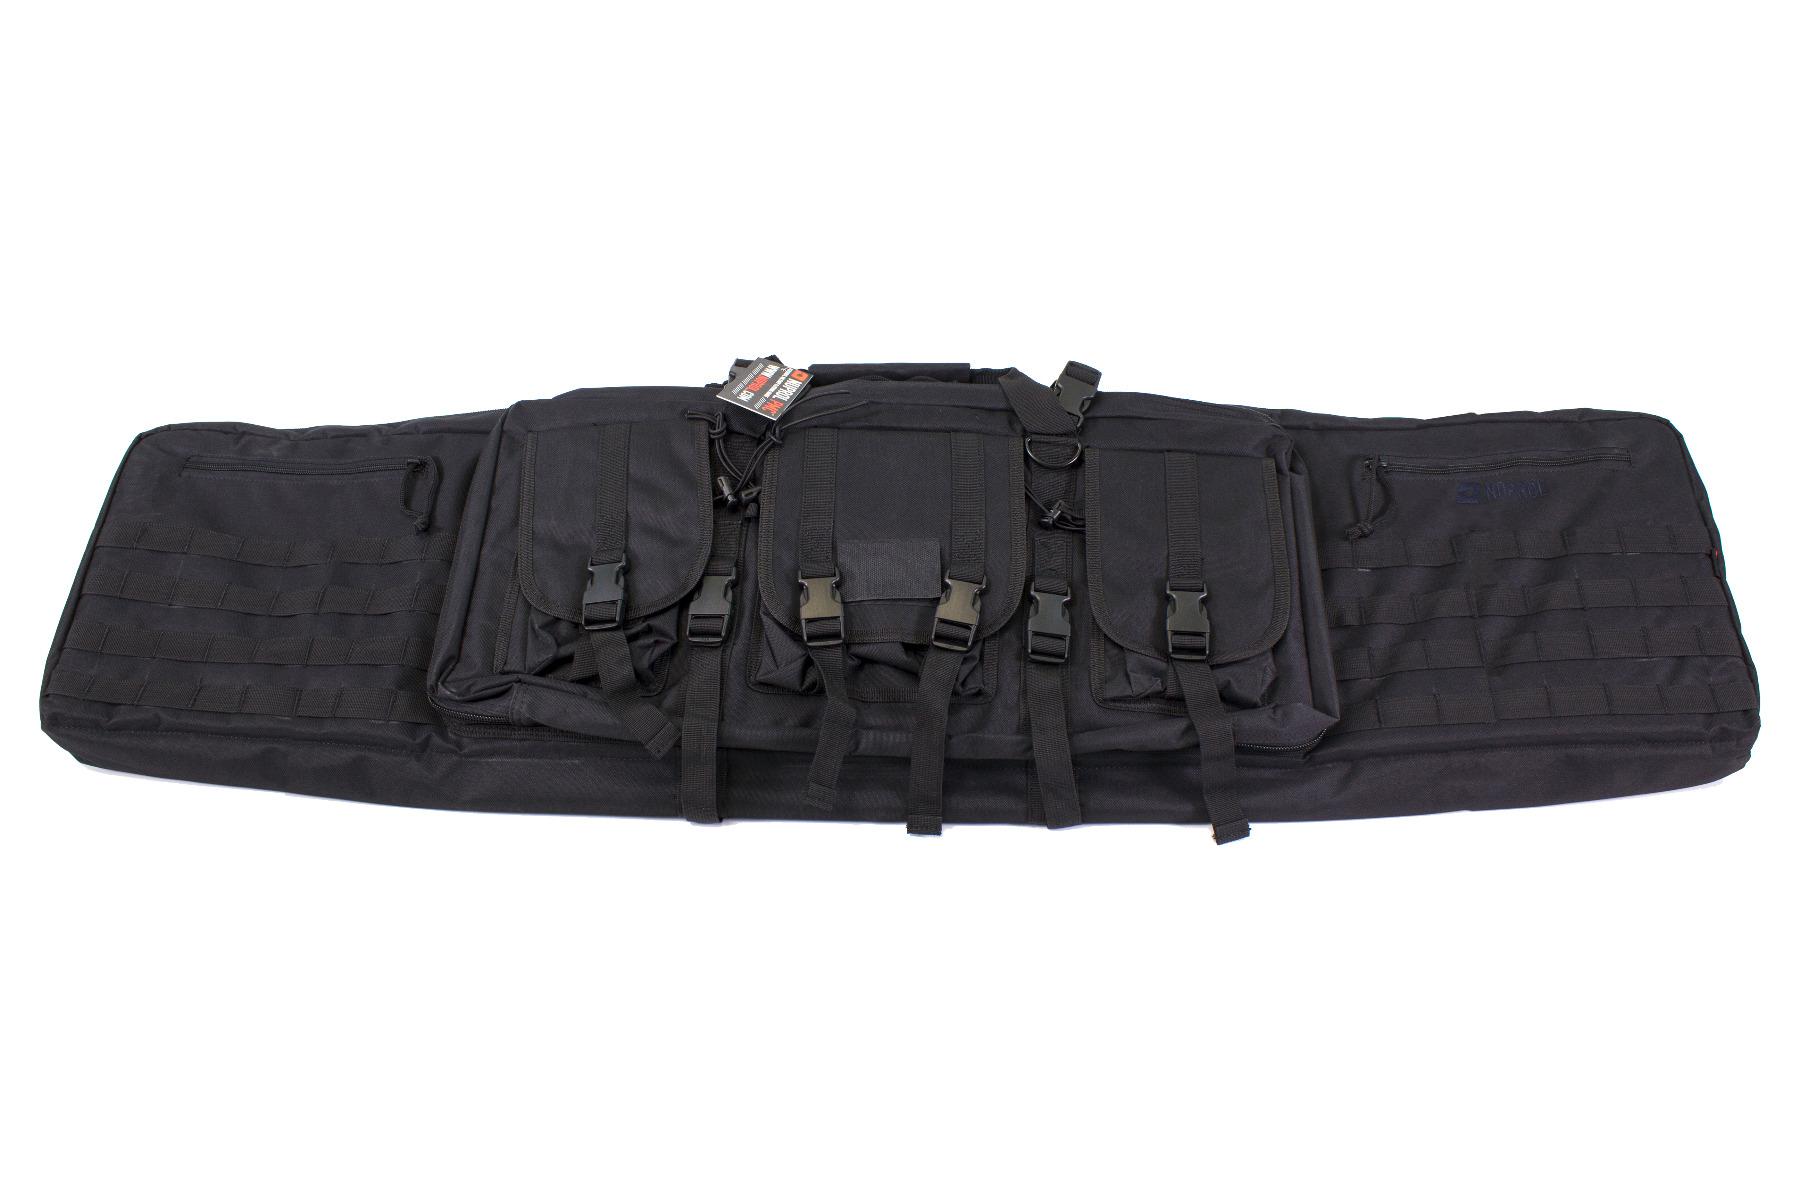 NUPROL NP Soft Riffle Bag PMC Deluxe  54" 